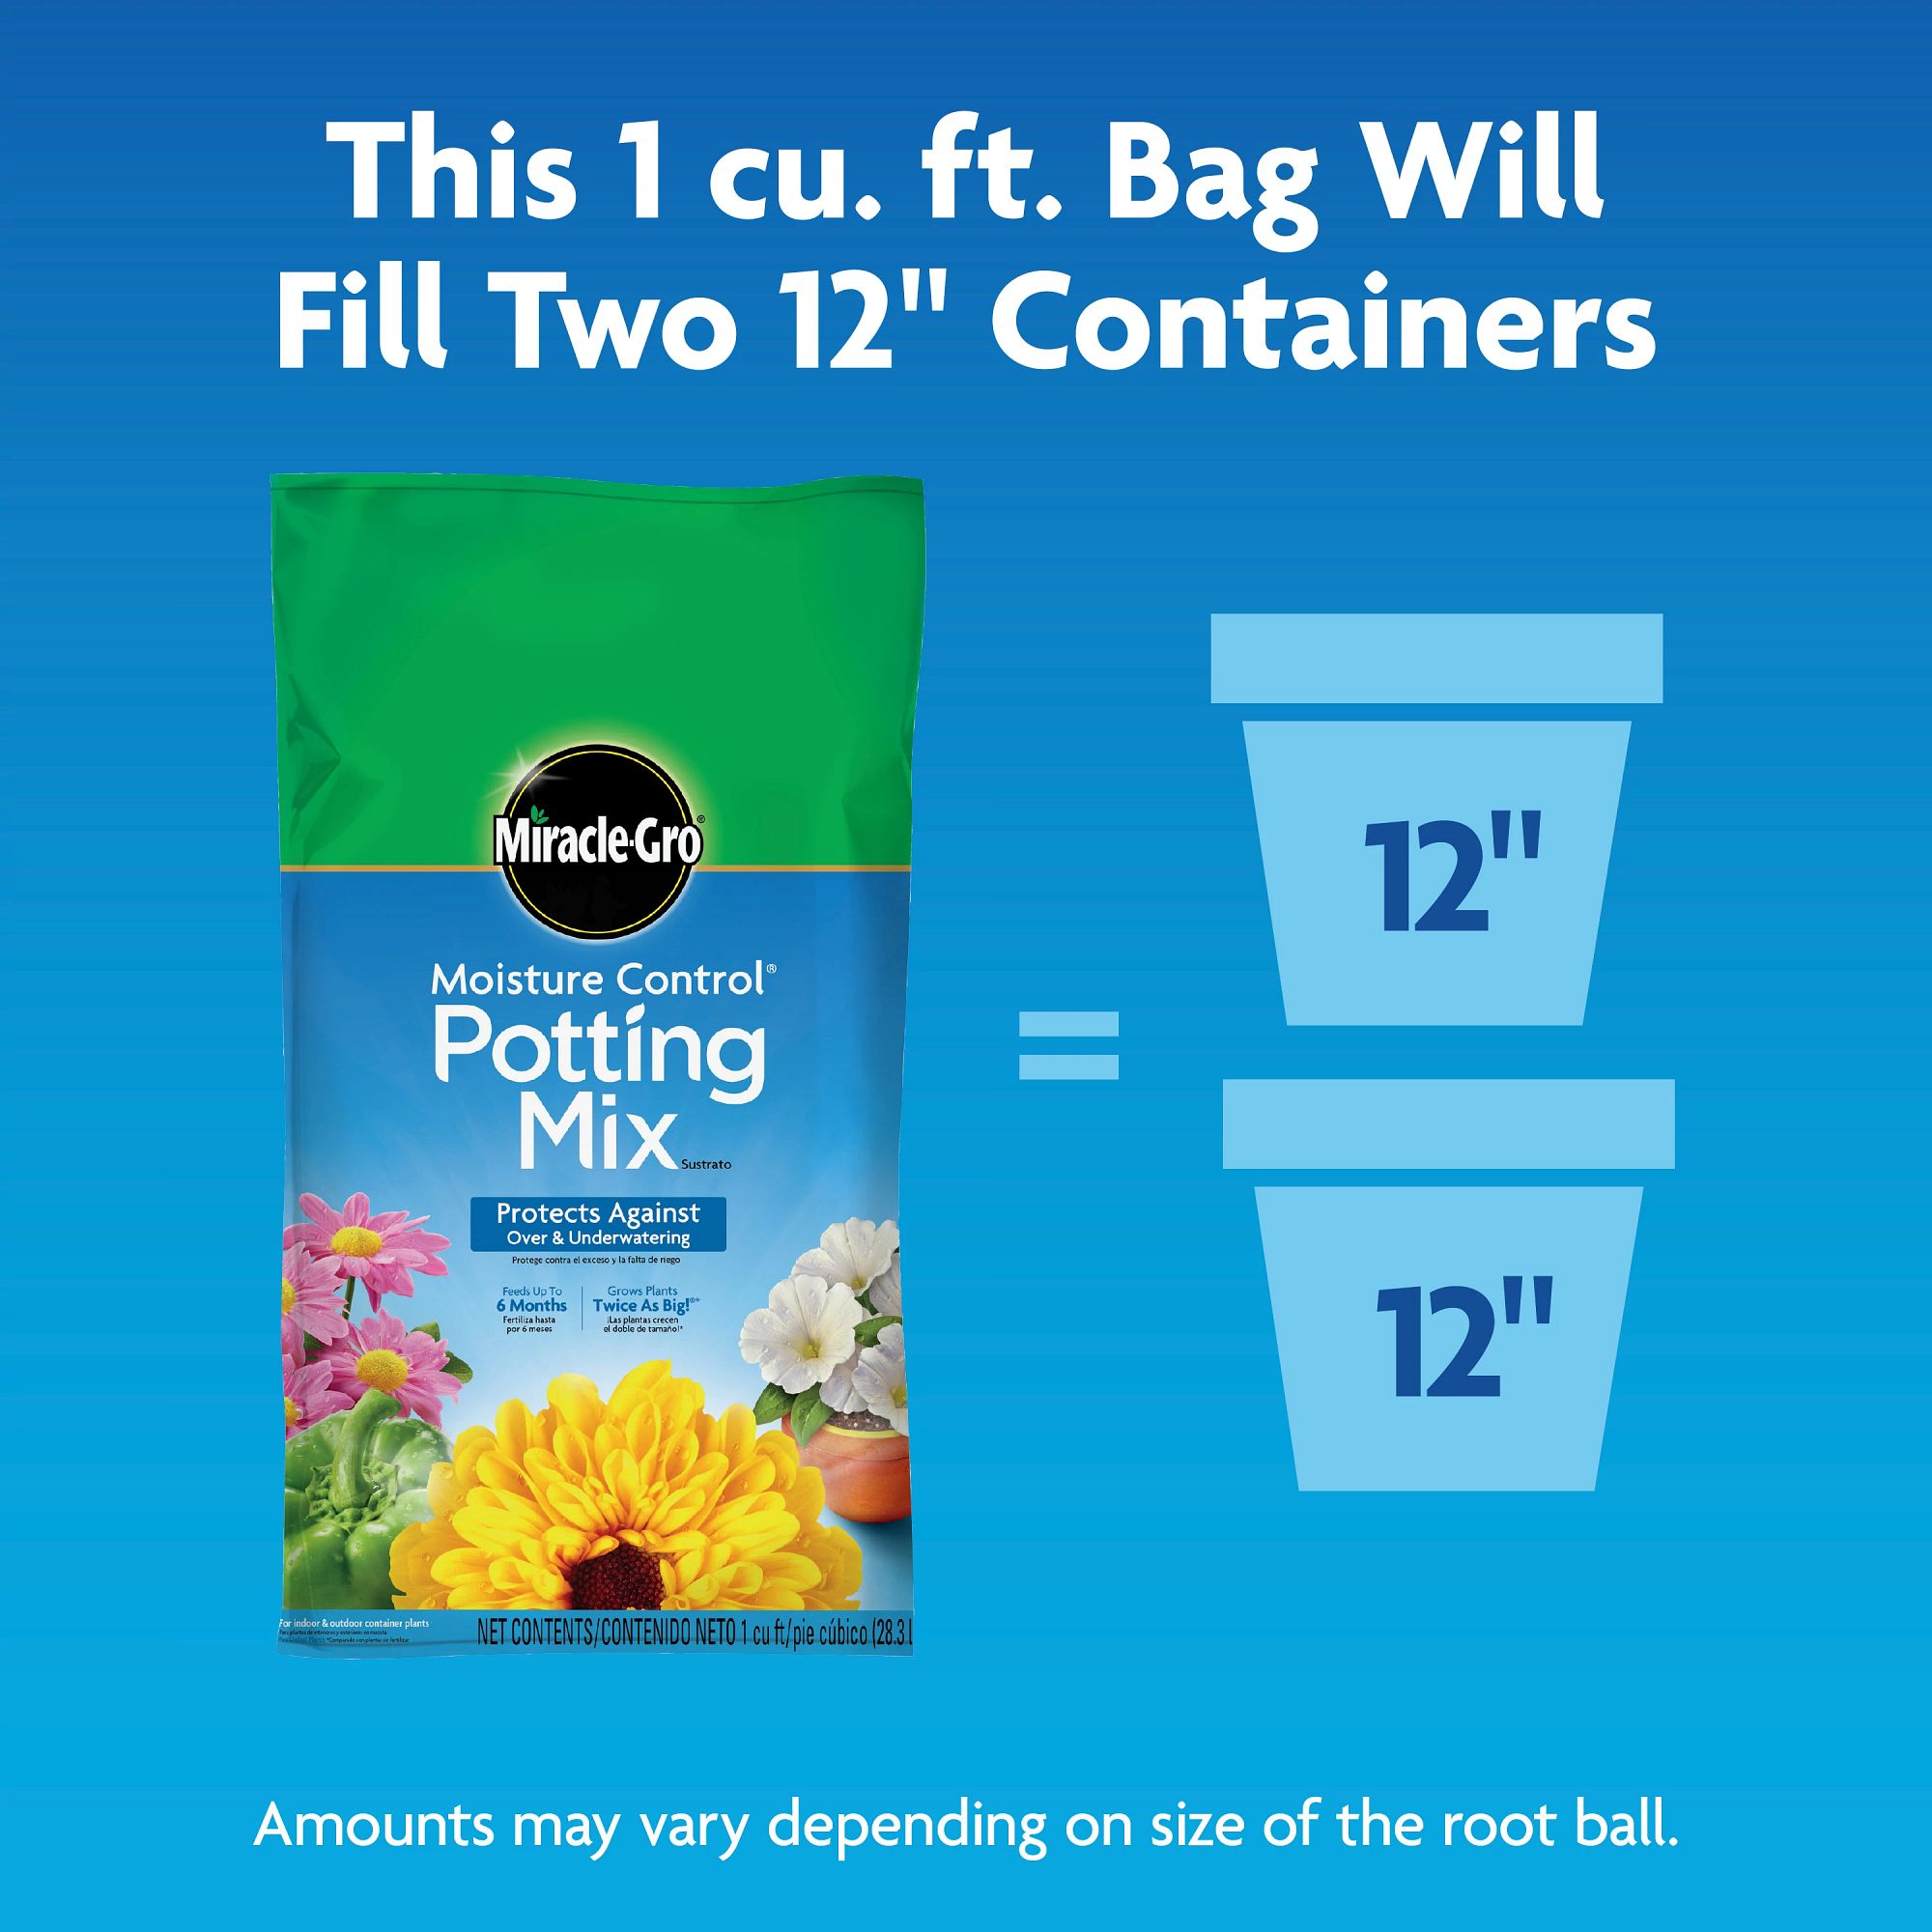 Miracle-Gro Moisture Control Potting Mix, 1 cu. ft., Feeds up to 6 Months - image 3 of 12